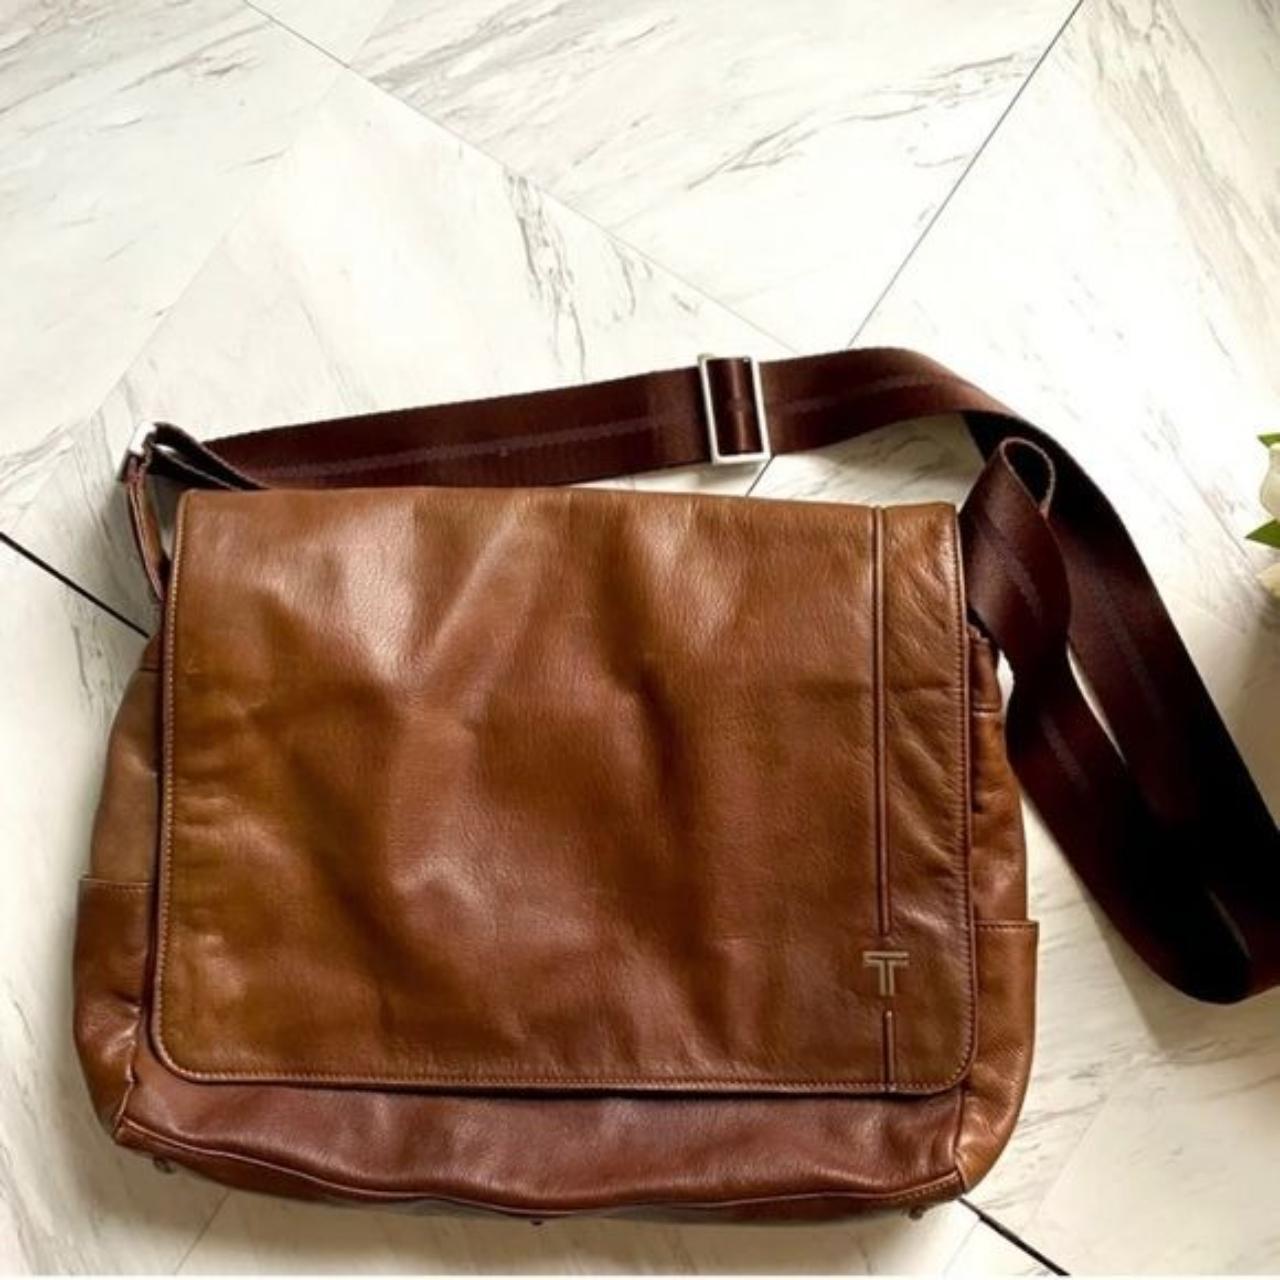 Product Image 2 - Gorgeous, supple brown leather crossbody